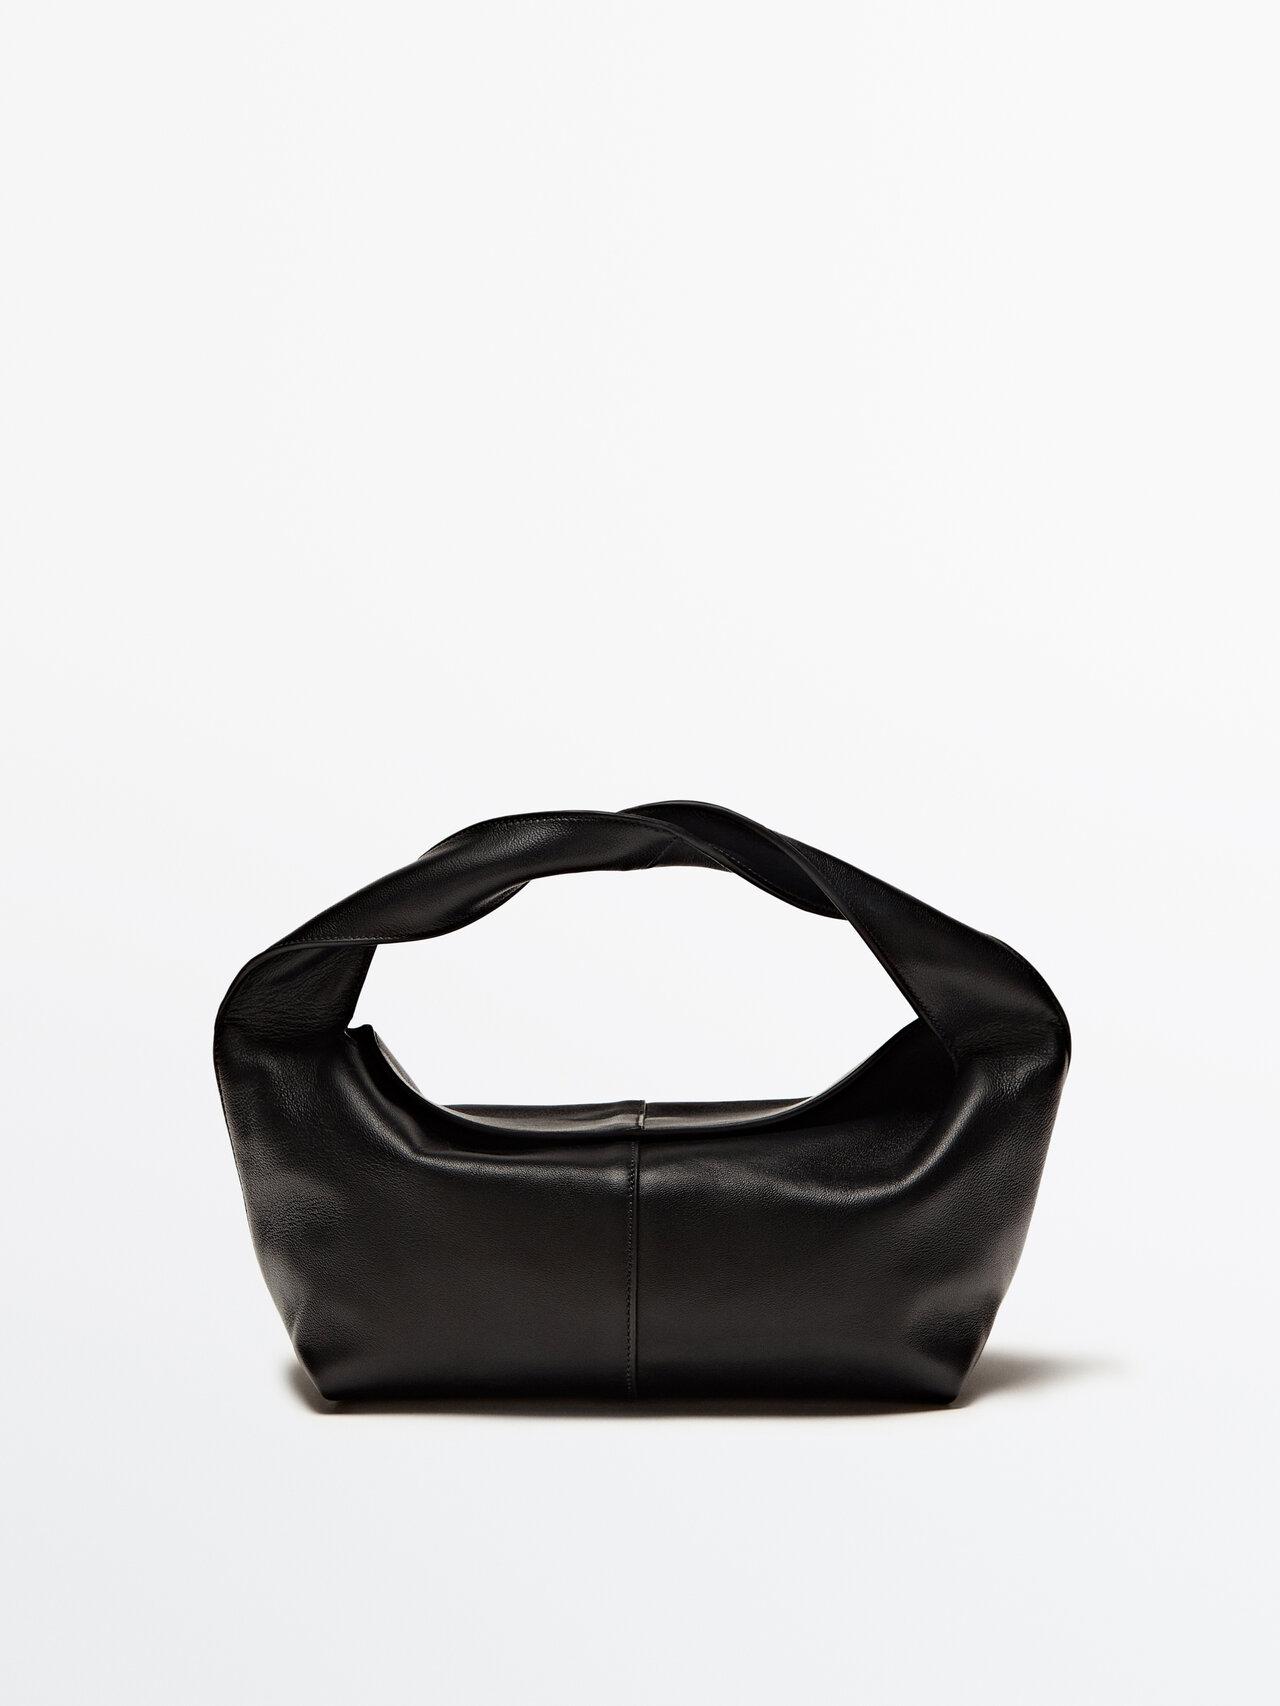 MASSIMO DUTTI Nappa Leather Croissant Bag in Black | Lyst